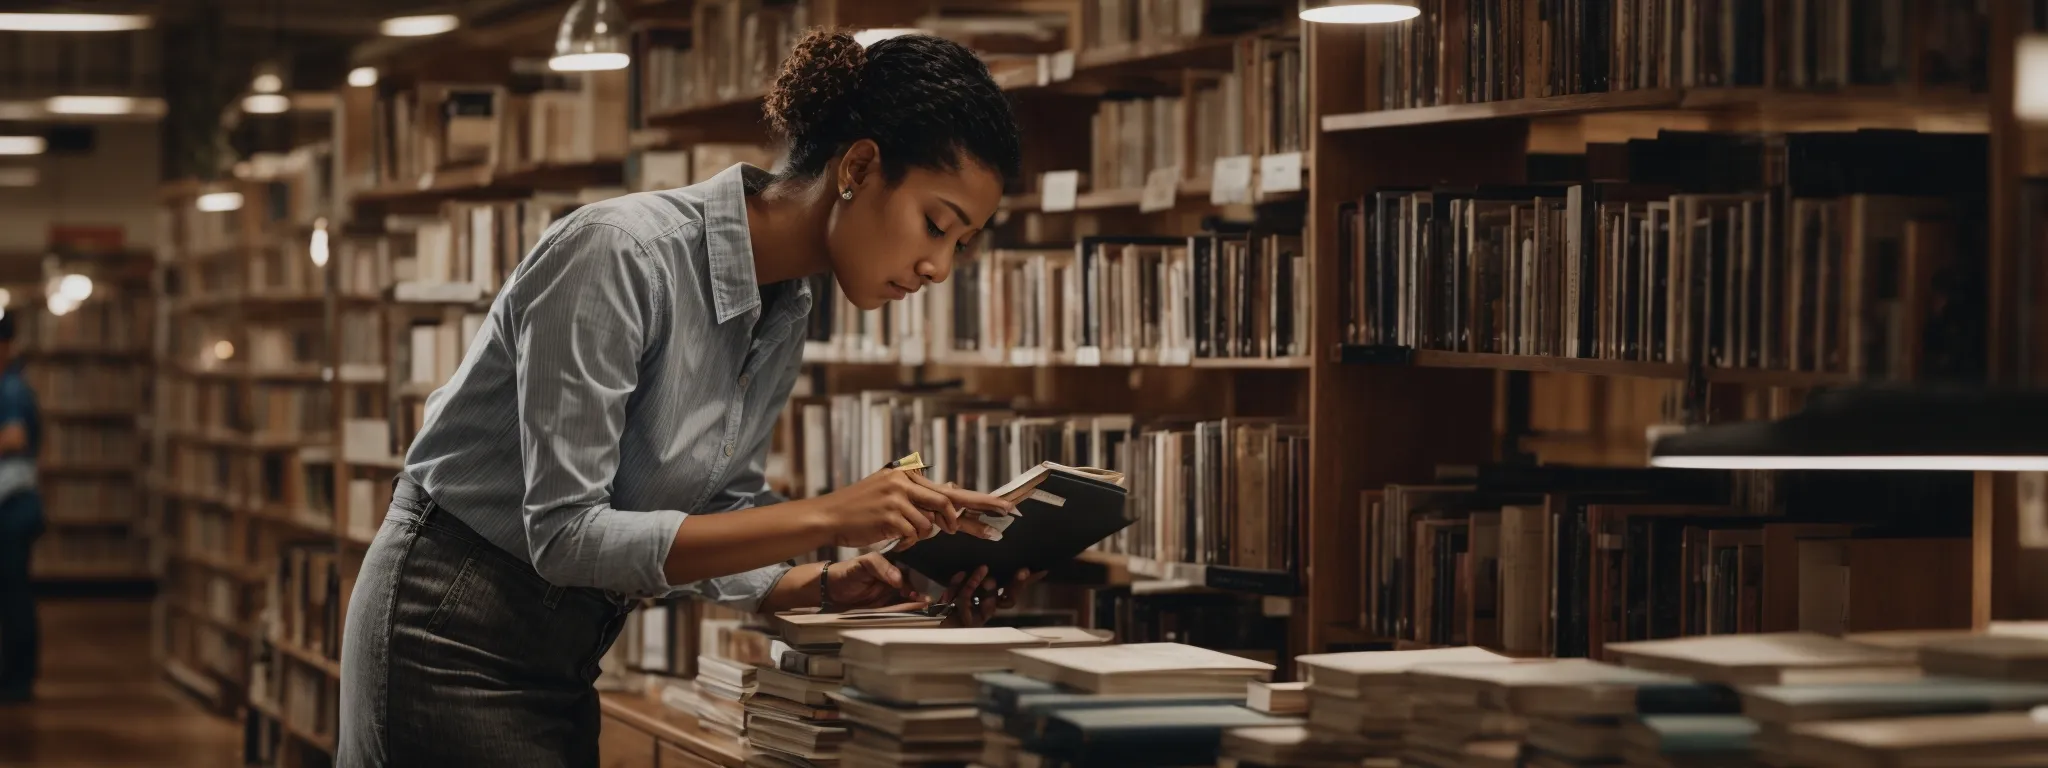 a librarian is organizing books on seo and marketing in a well-lit, modern library.